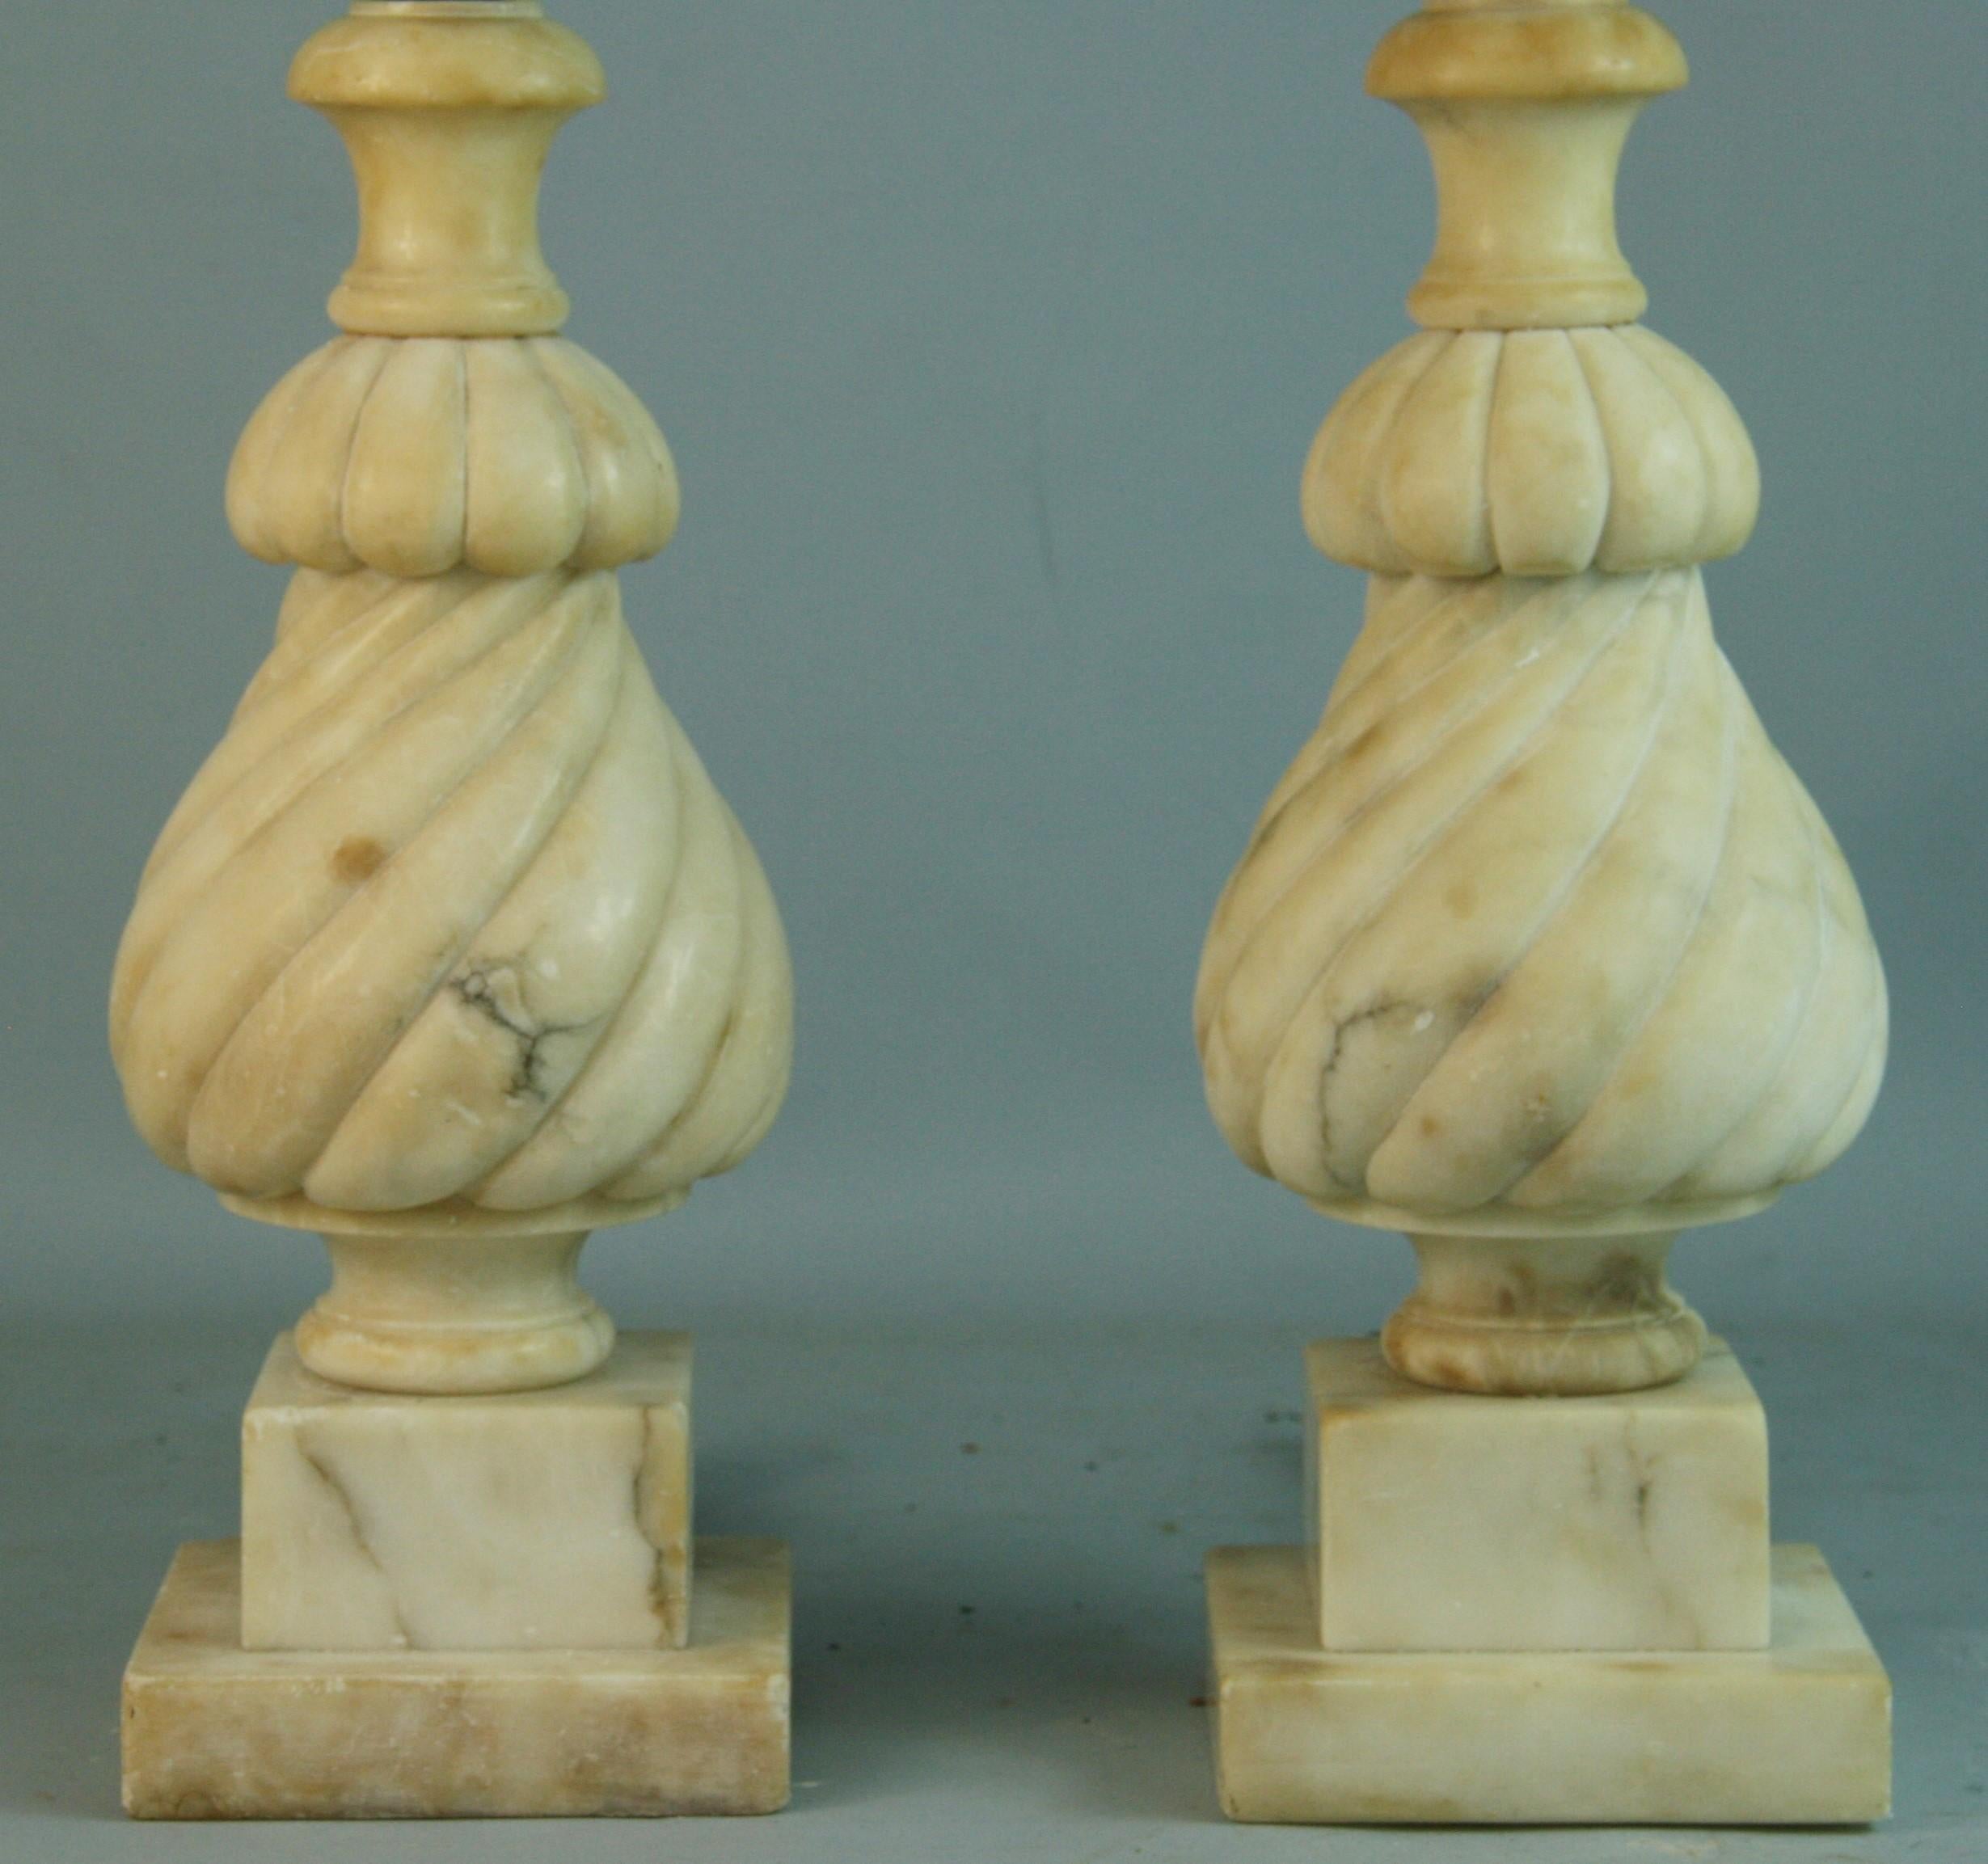 1510 Pair rare hand carved alabaster[  spiral lamps.
Dimension shown for alabaster only
Lamps will be rewired on demand